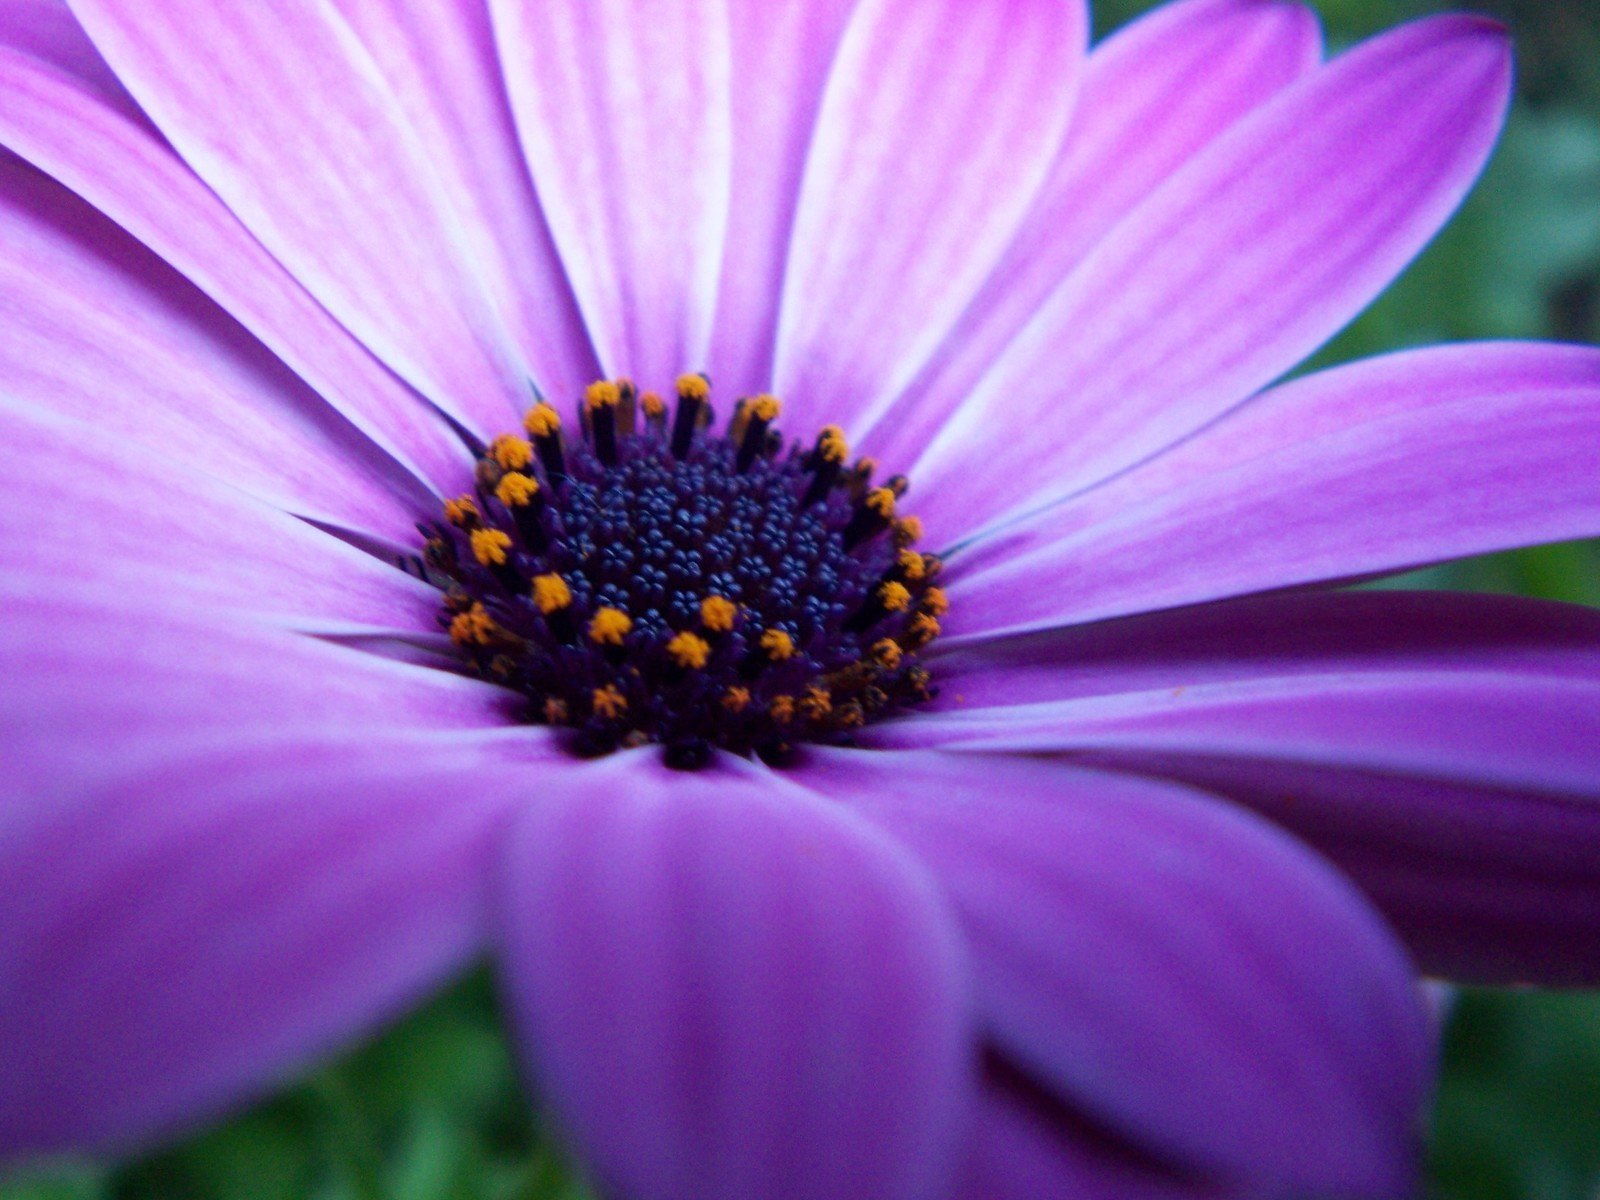 the middle of a purple flower with orange tipped petals